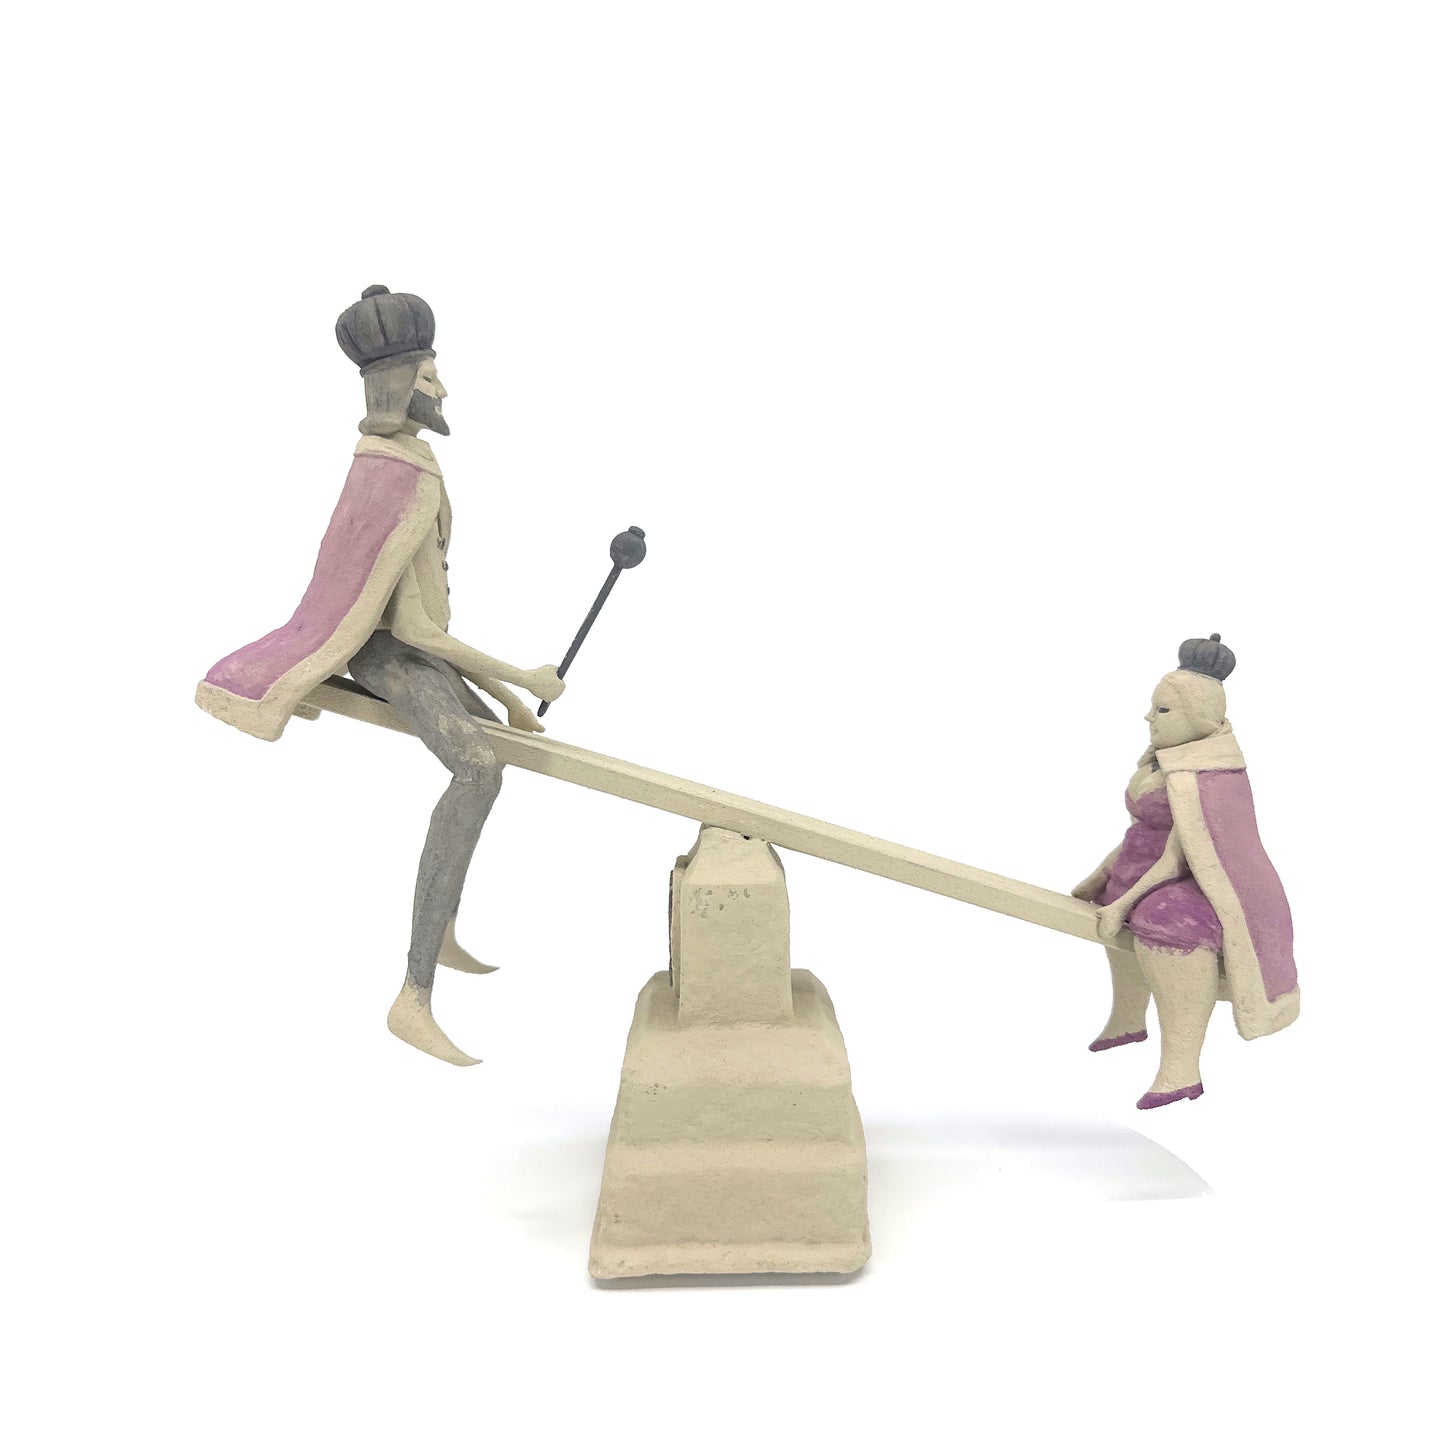 Rare “Royal Seesaw" - King and Queen Seesaw Relics Sculpture by IFM